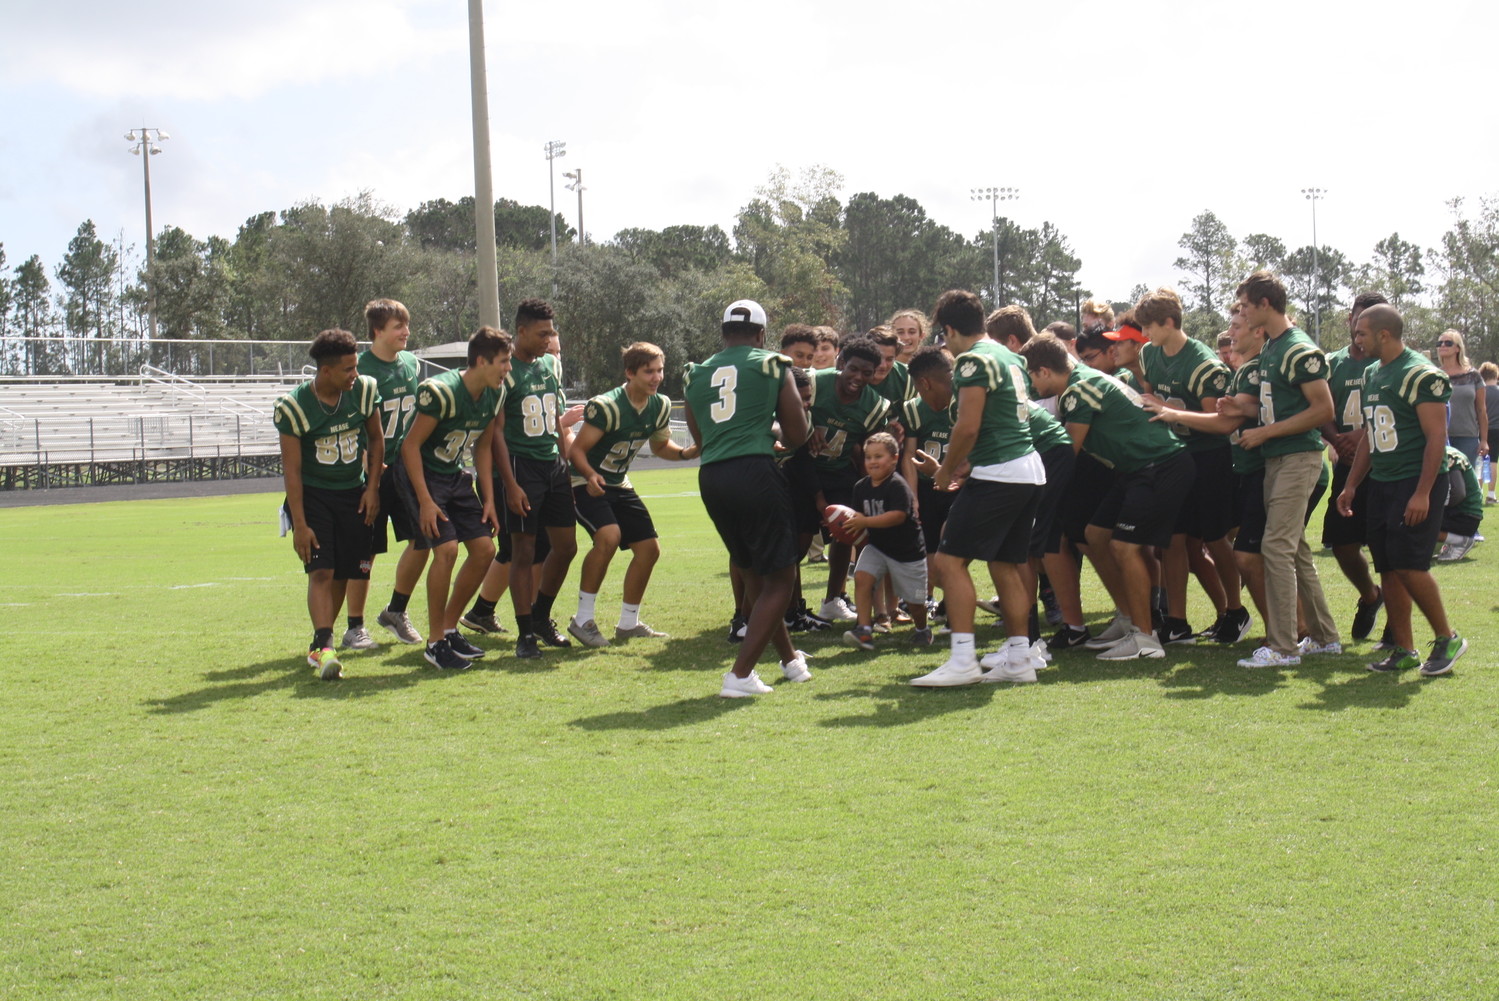 Special needs students from Valley Ridge Academy, Timberlin Creek Elementary and Wards Creek Elementary score touchdowns with the support of the Nease football team during the “Victory Day” event at Nease High School last Friday.